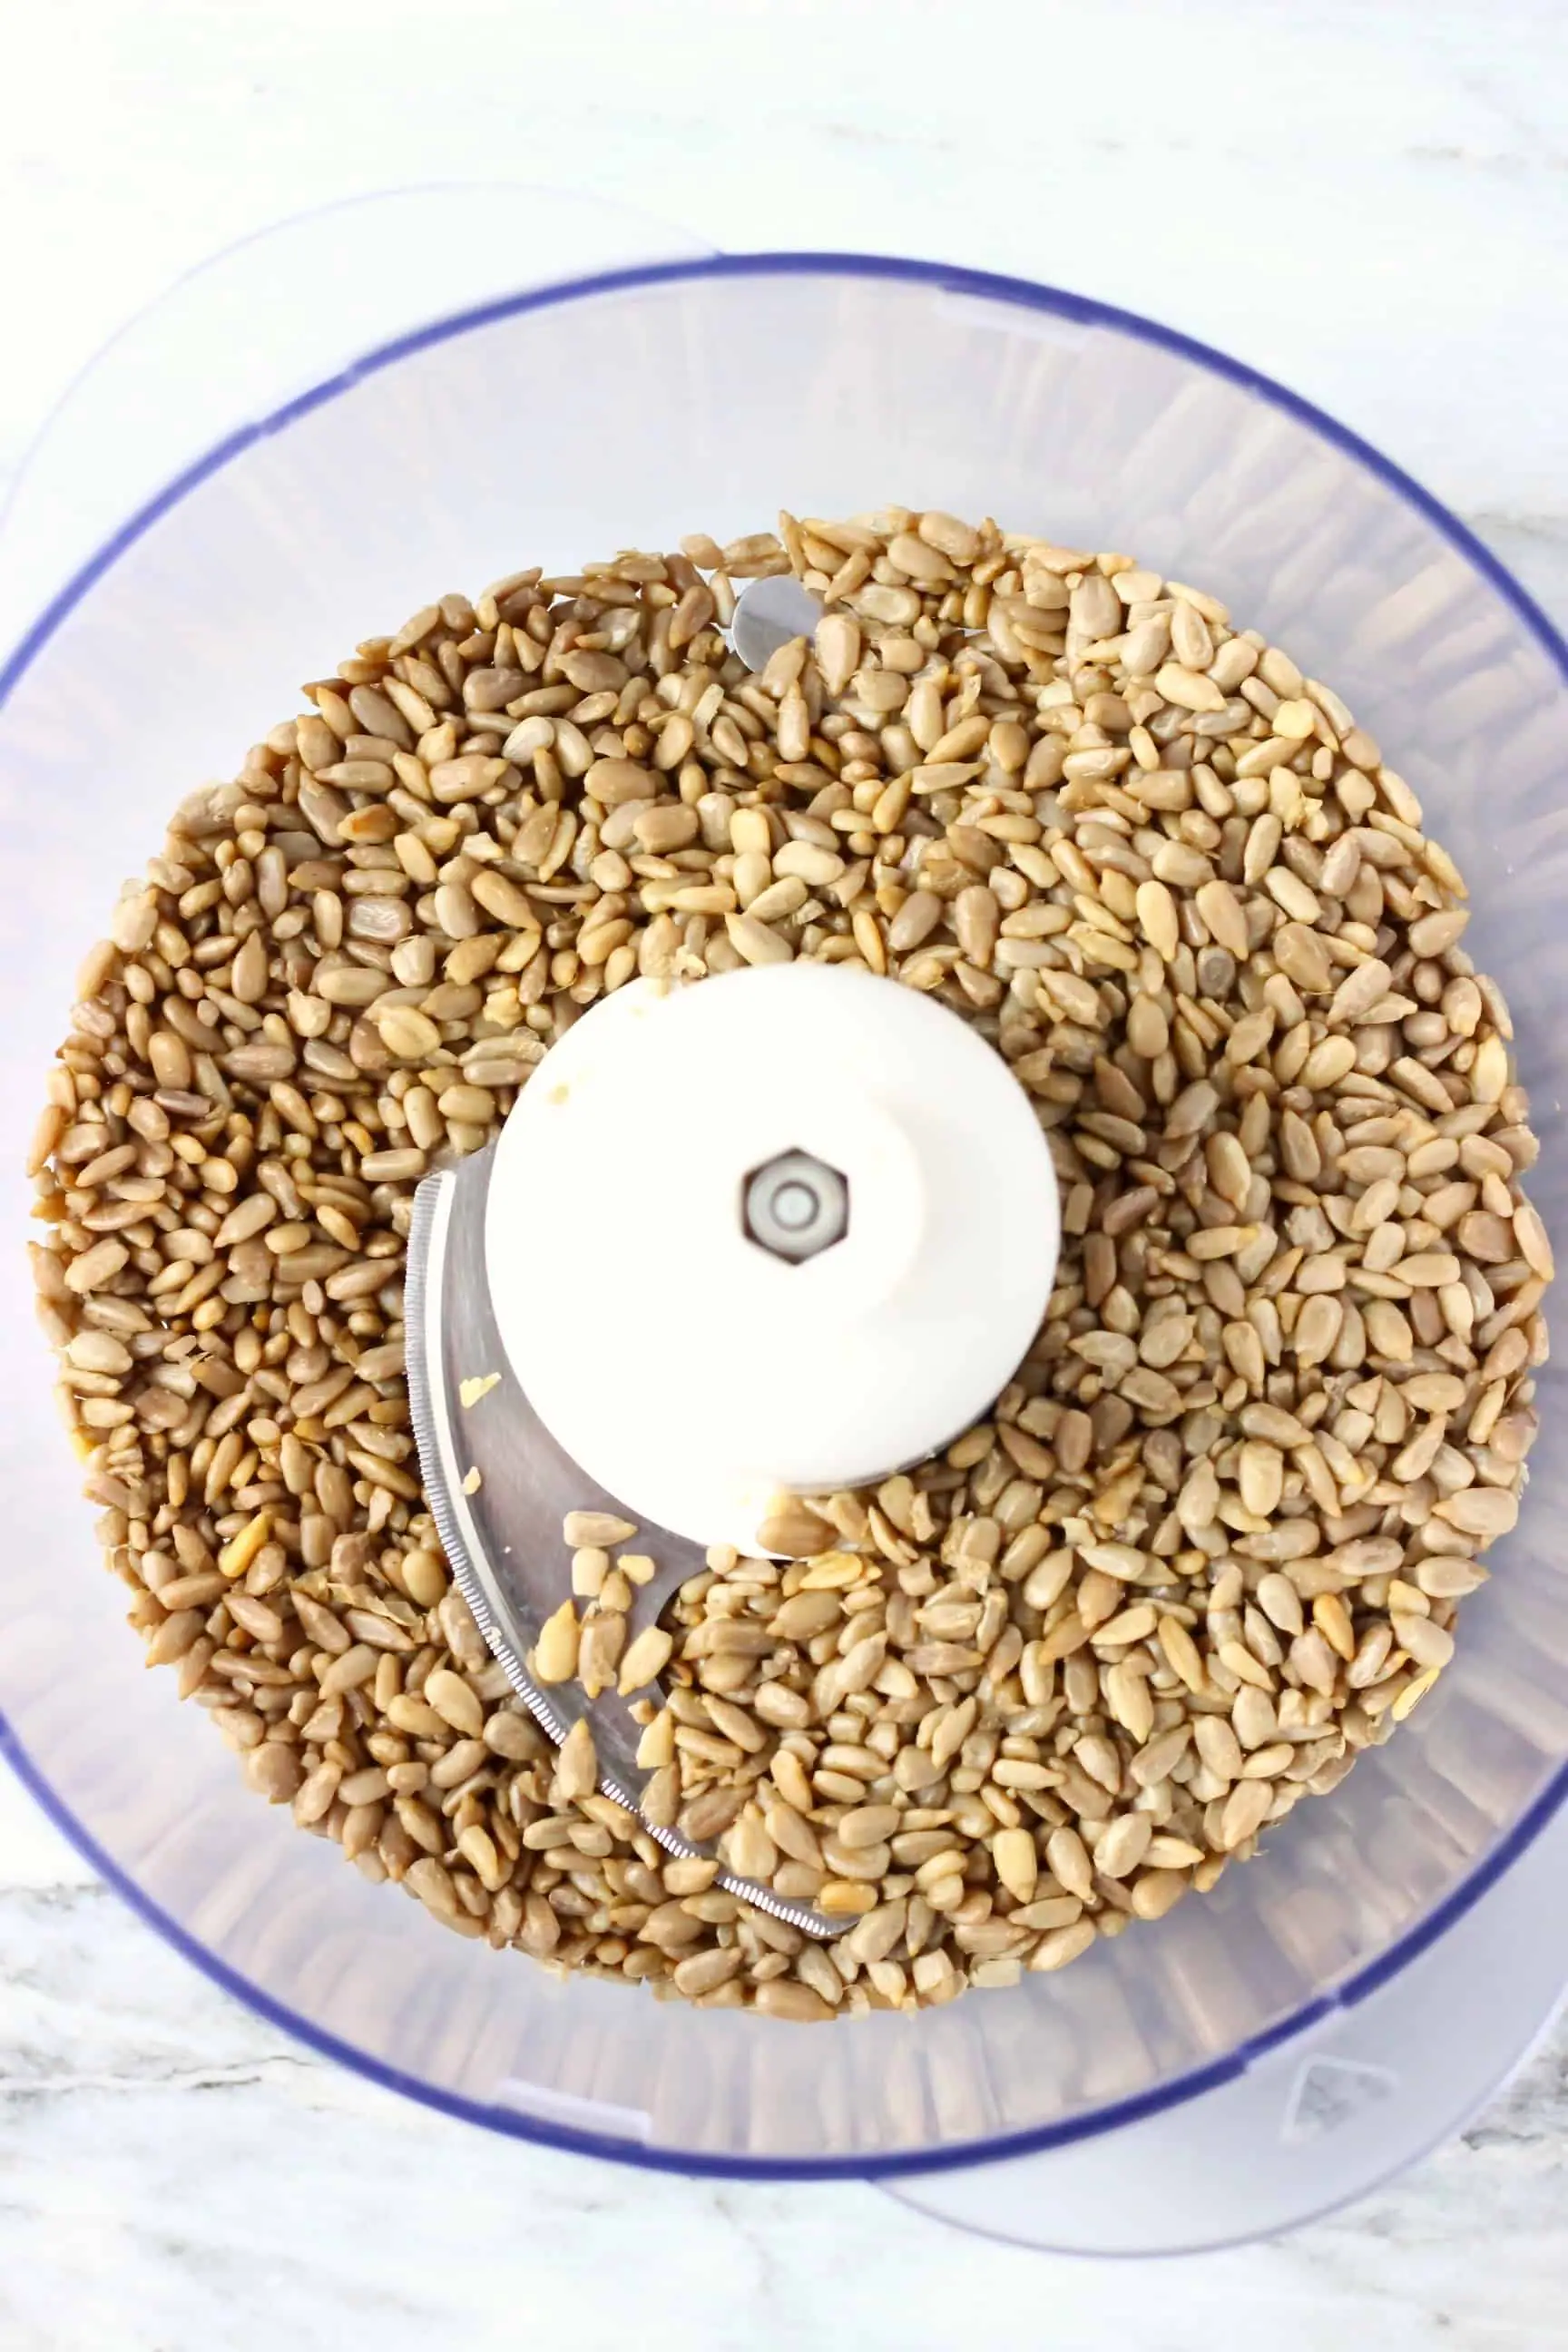 Sunflower seeds in a food processor